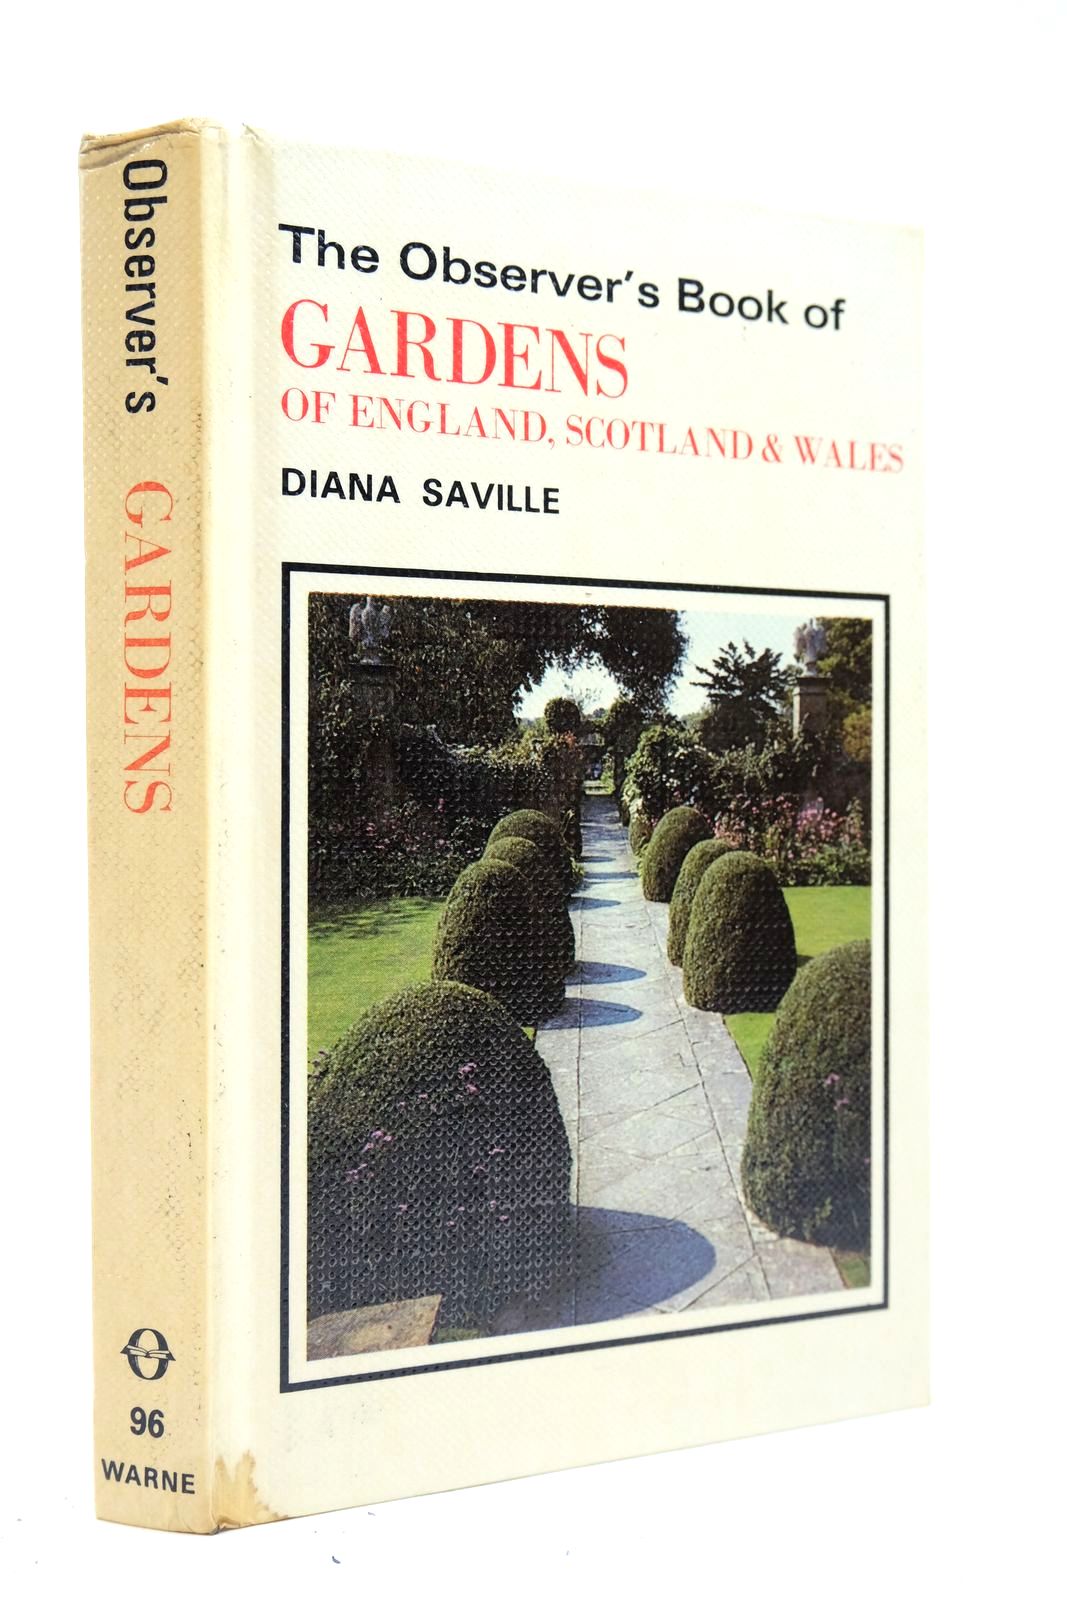 Photo of THE OBSERVER'S BOOK OF GARDENS OF ENGLAND, SCOTLAND & WALES written by Saville, Diana published by Frederick Warne & Co Ltd. (STOCK CODE: 2134666)  for sale by Stella & Rose's Books